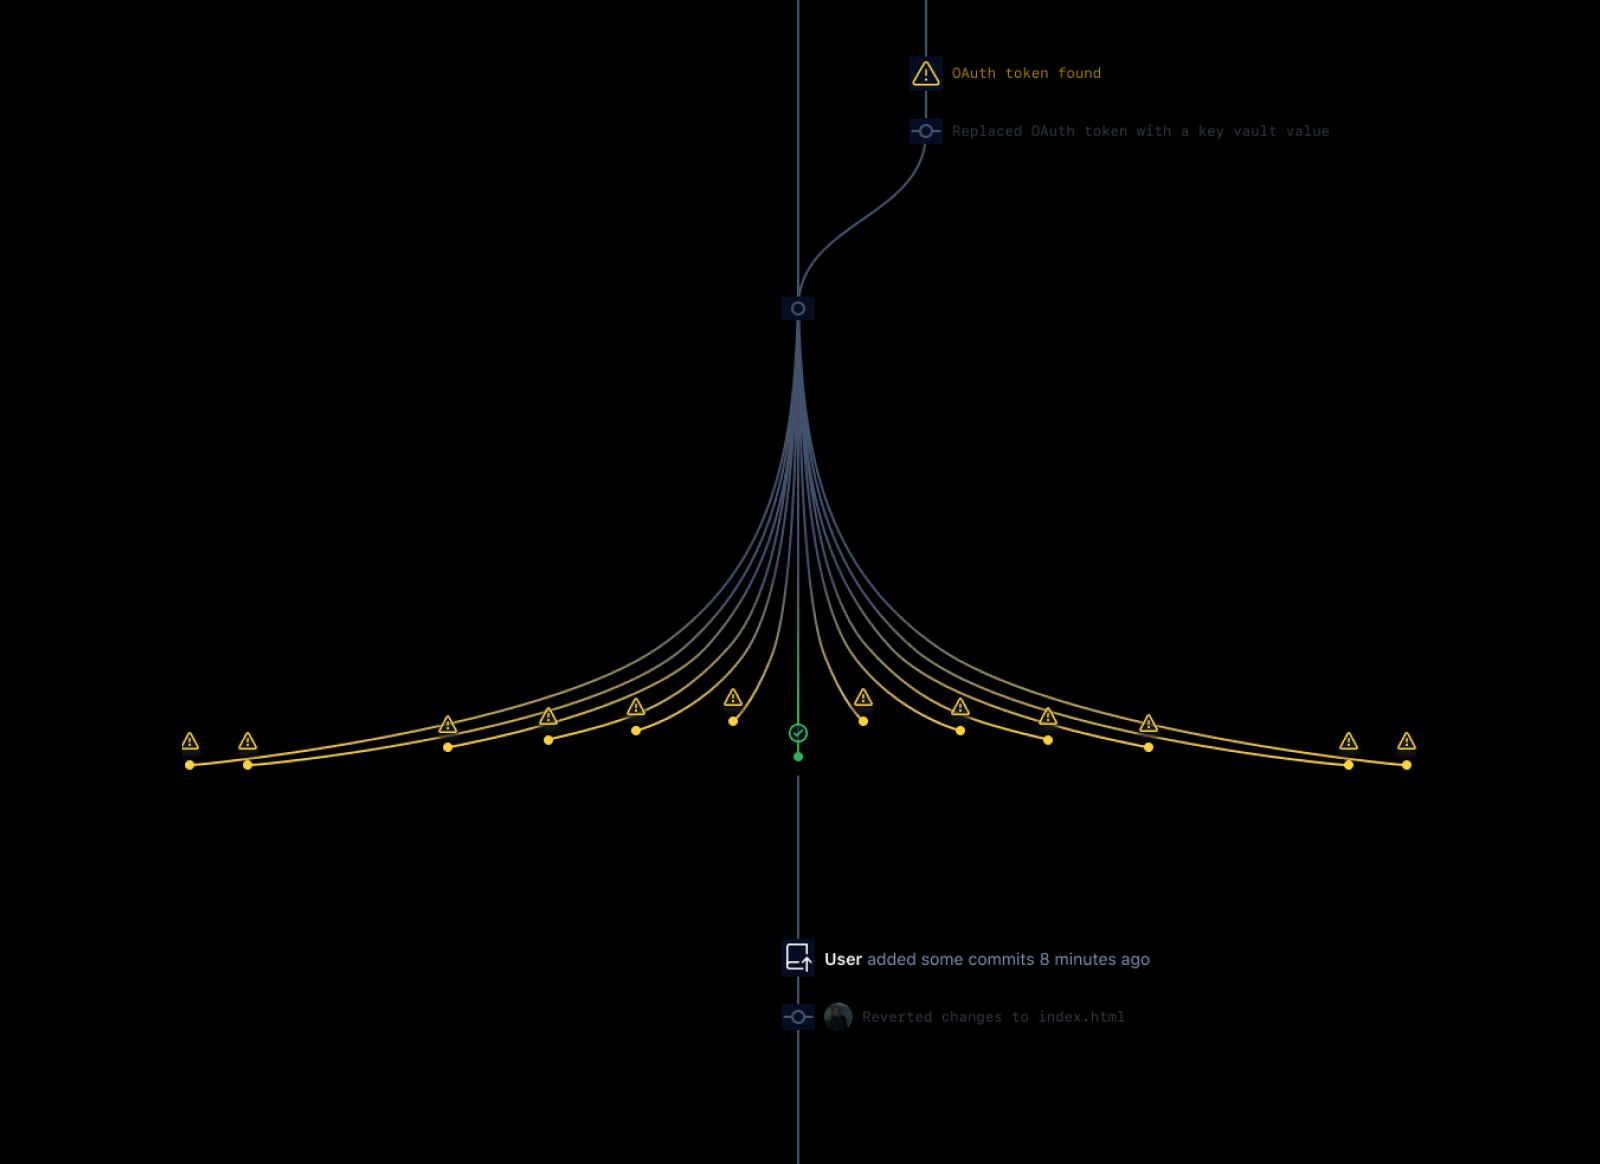 Illustration on a black background showing a single git line diverging into many as it fades from blue to yellow